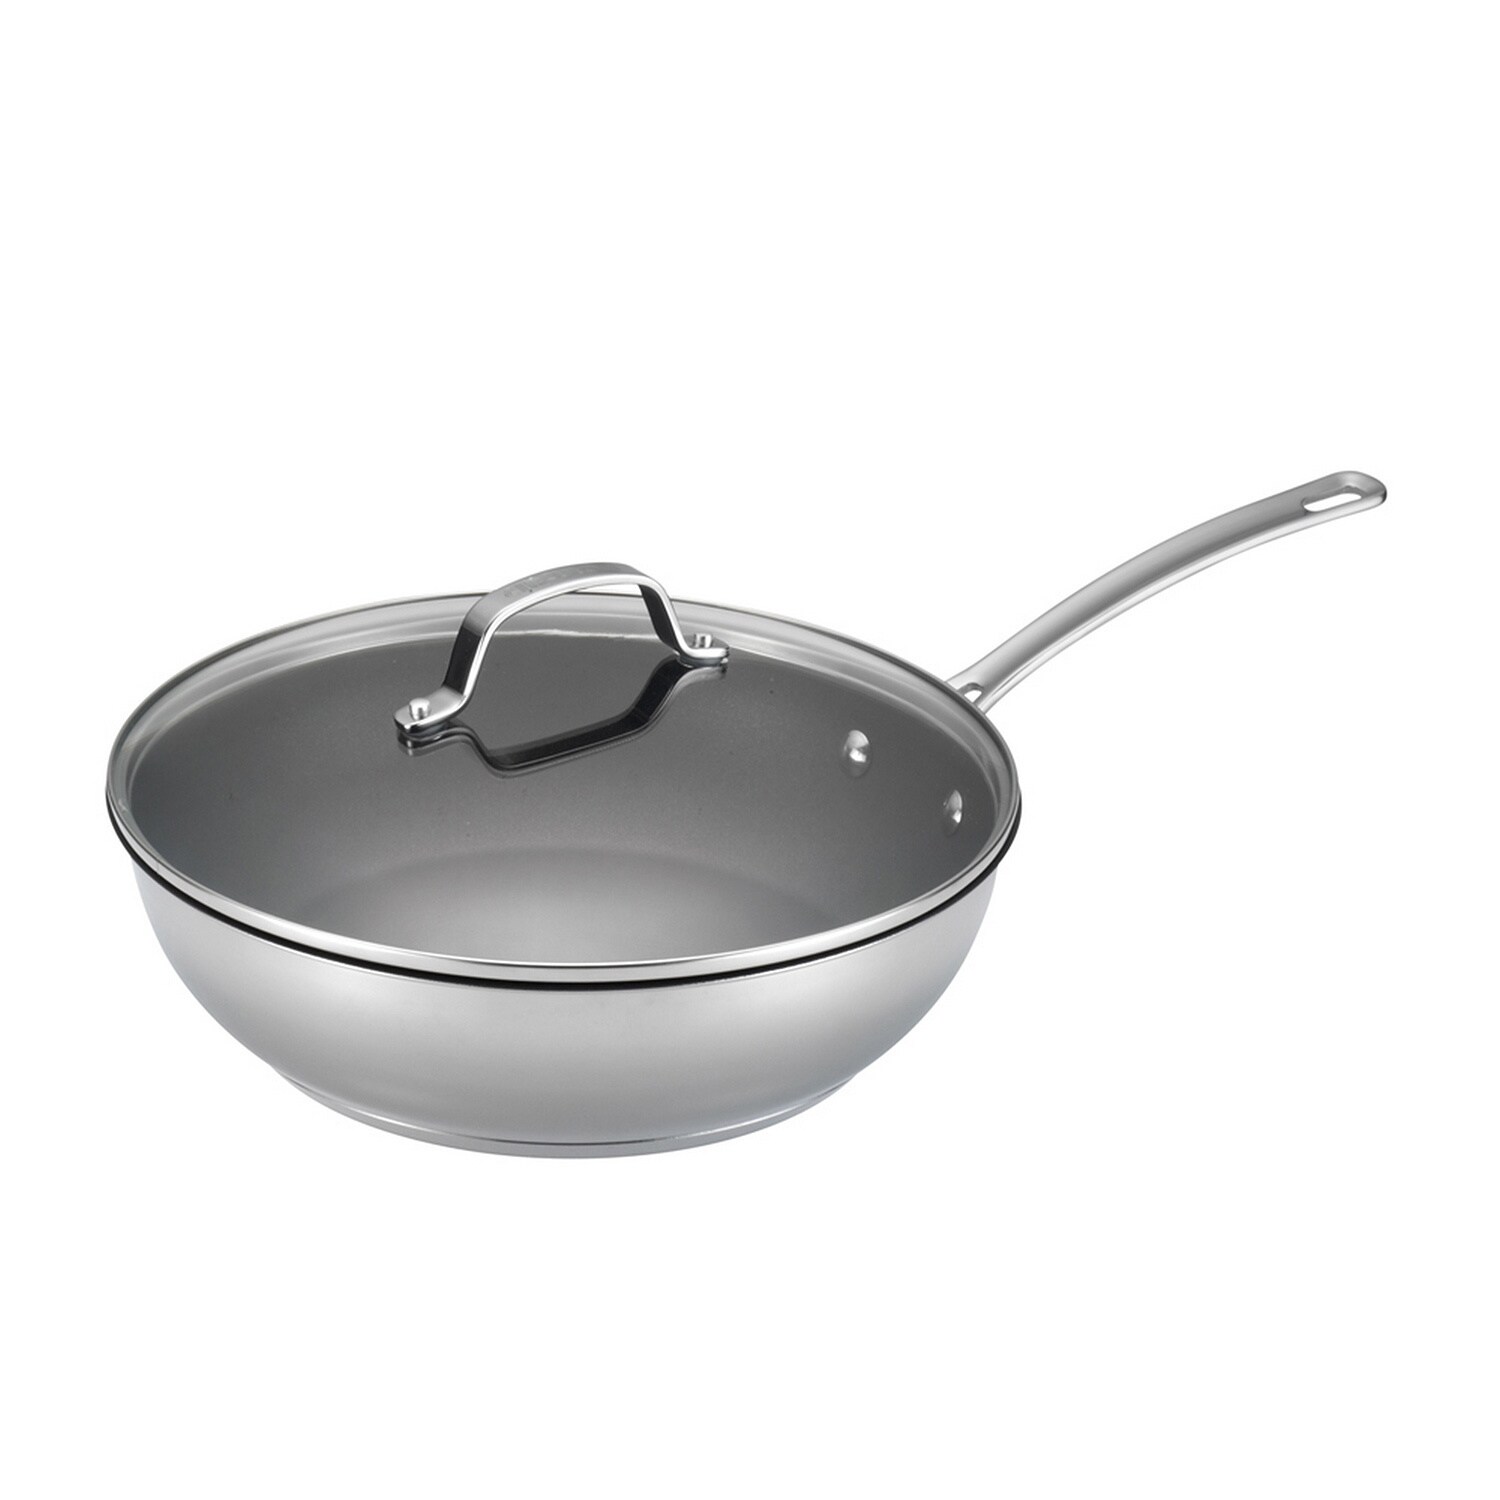 https://ak1.ostkcdn.com/images/products/9206718/Circulon-Genesis-Stainless-Steel-Nonstick-12.5-Inch-Covered-Deep-Skillet-dae8562e-eae9-418f-ae16-71e58451c6c9.jpg